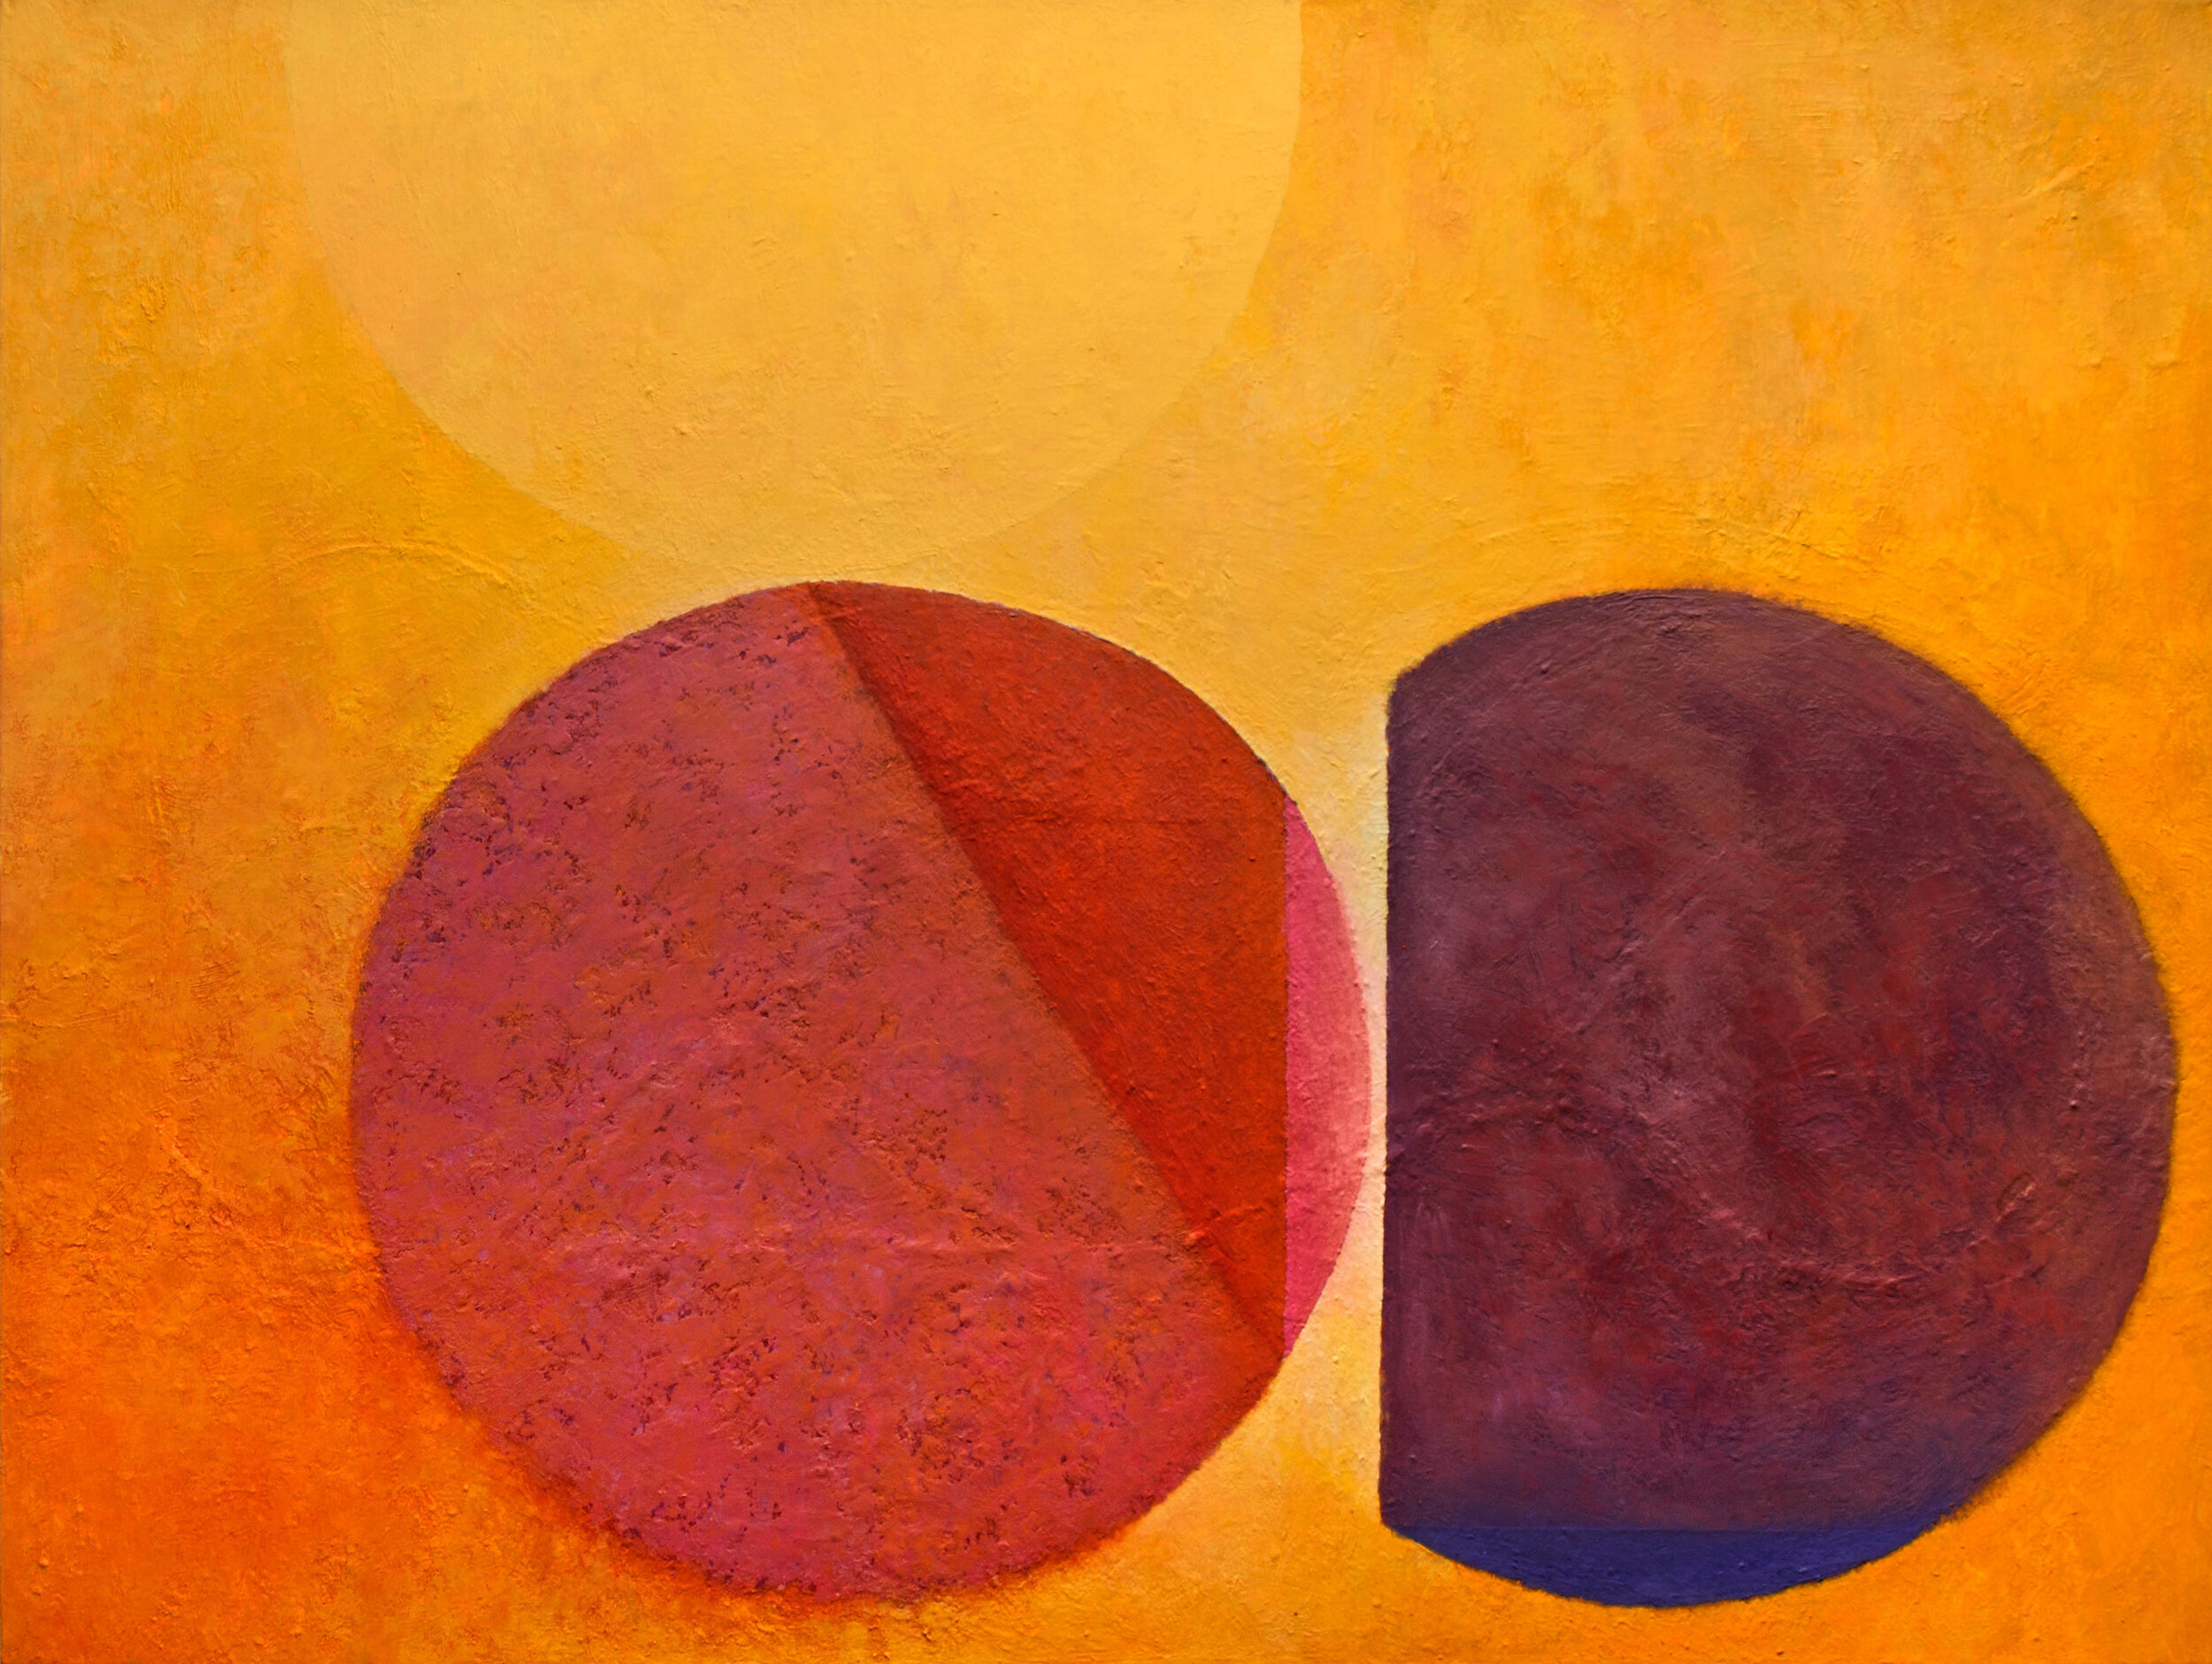 Untitled, 2012, Oil on Canvas, 30" x 40"